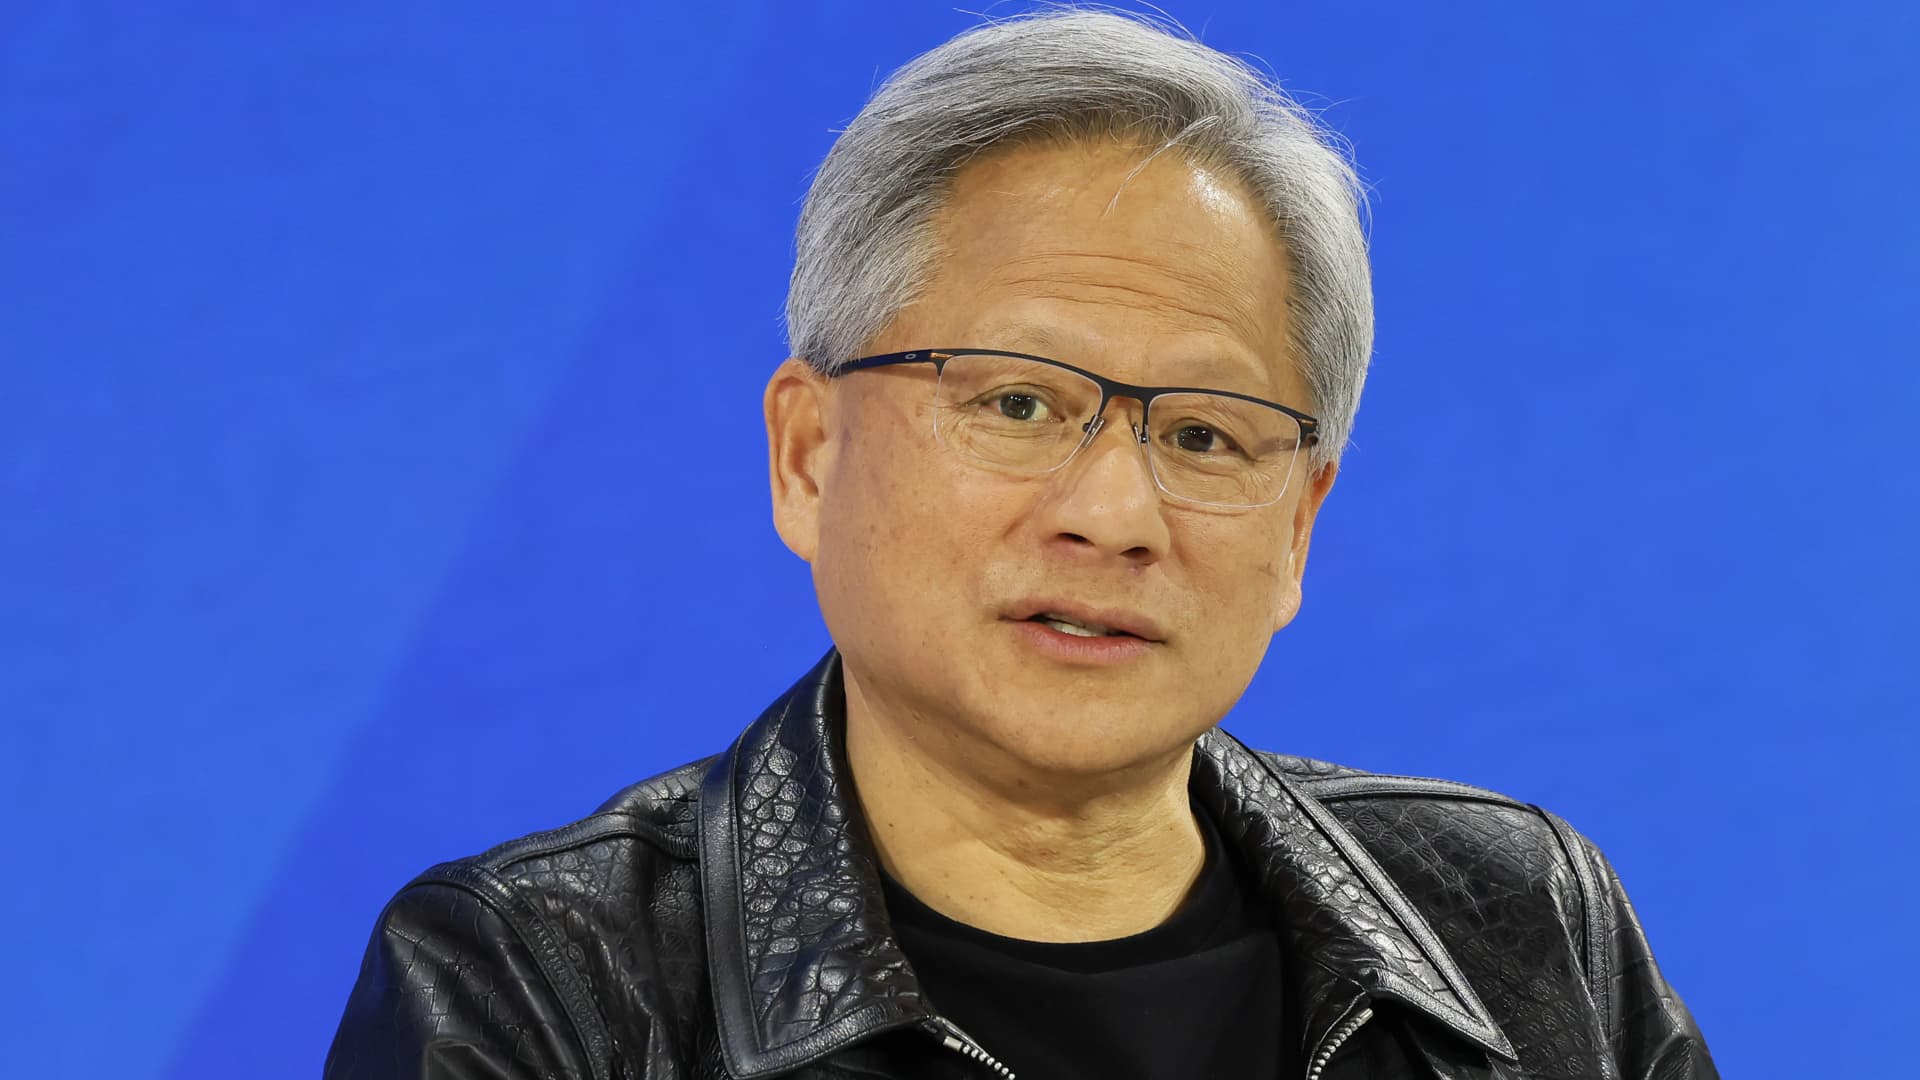 Nvidia CEO Jensen Huang says AI will be ‘quite competitive’ with humans in 5 years